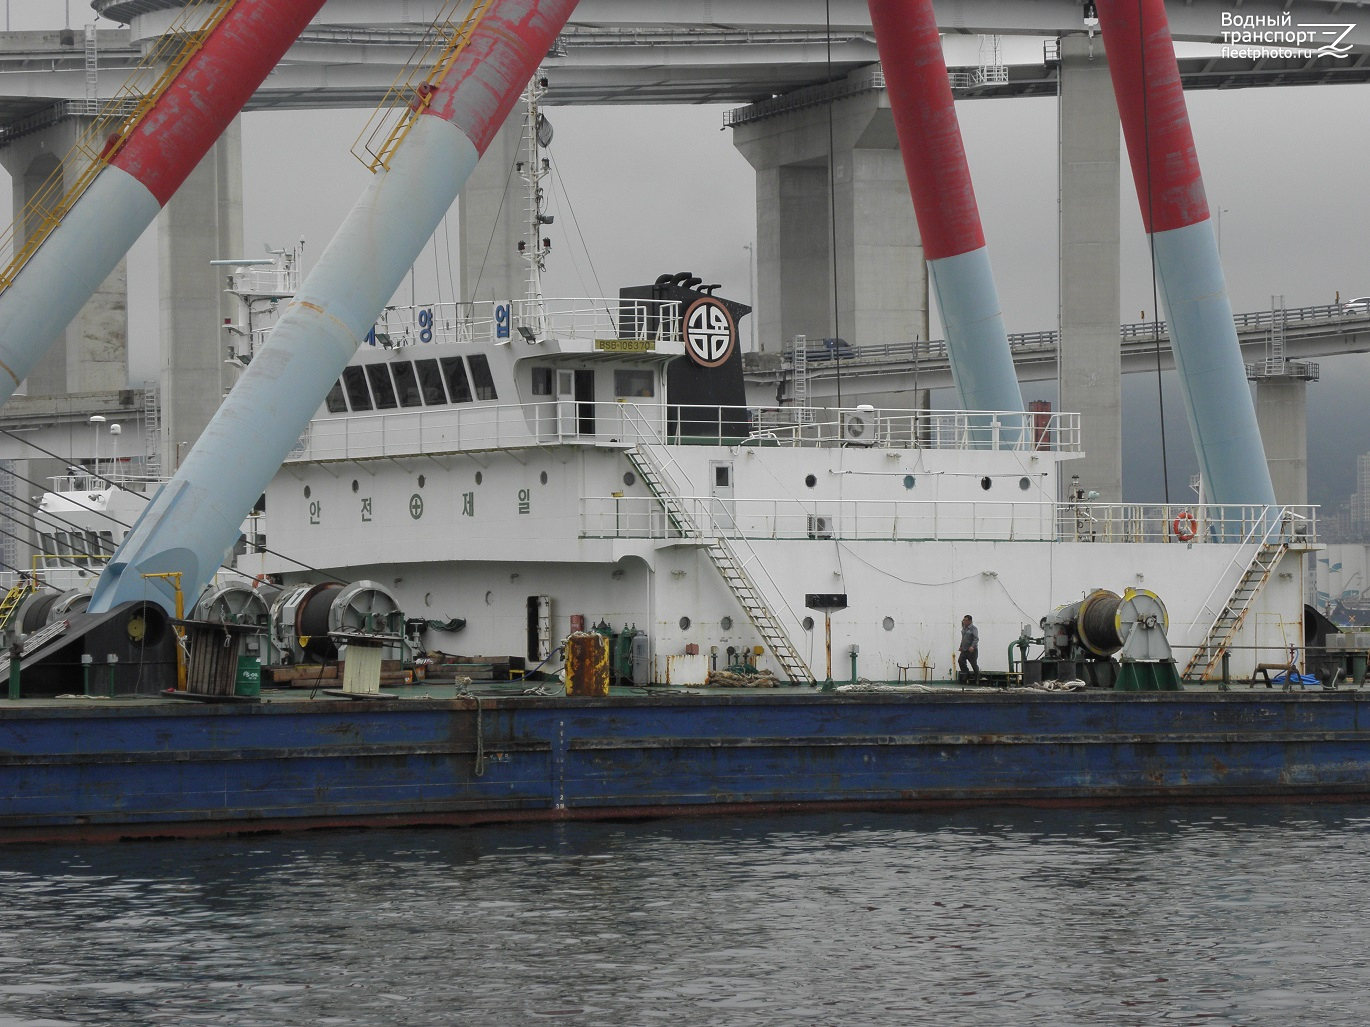 Kum Yong 1600. Vessel superstructures